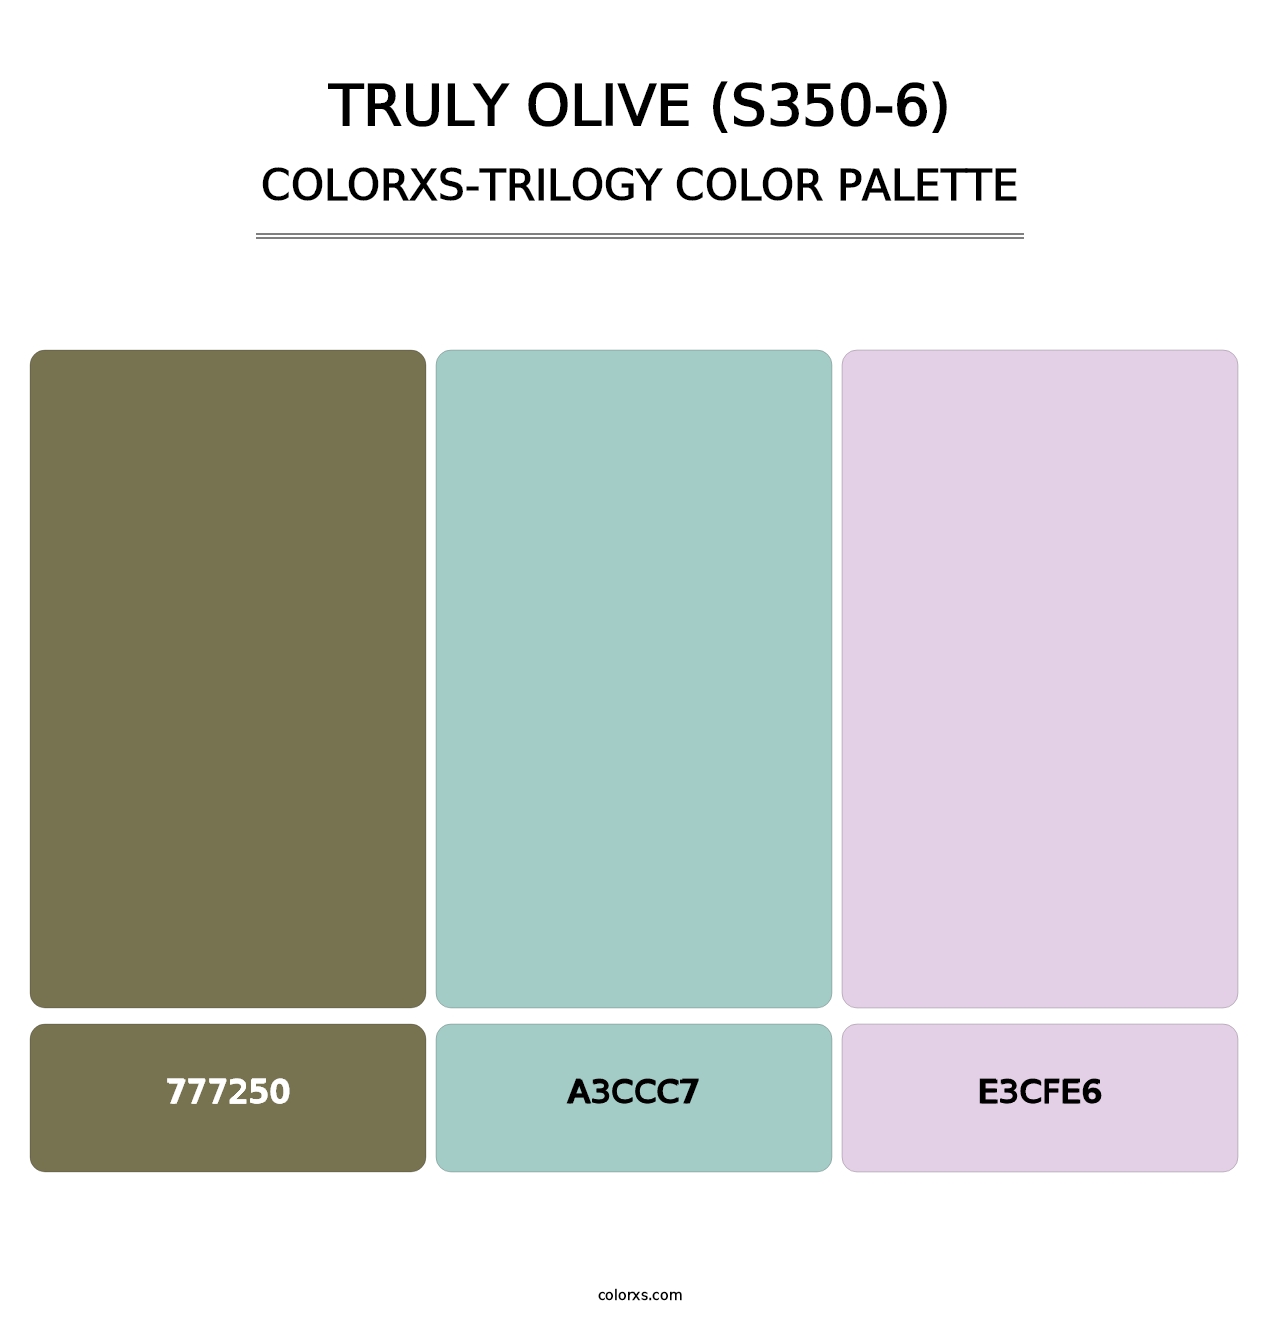 Truly Olive (S350-6) - Colorxs Trilogy Palette